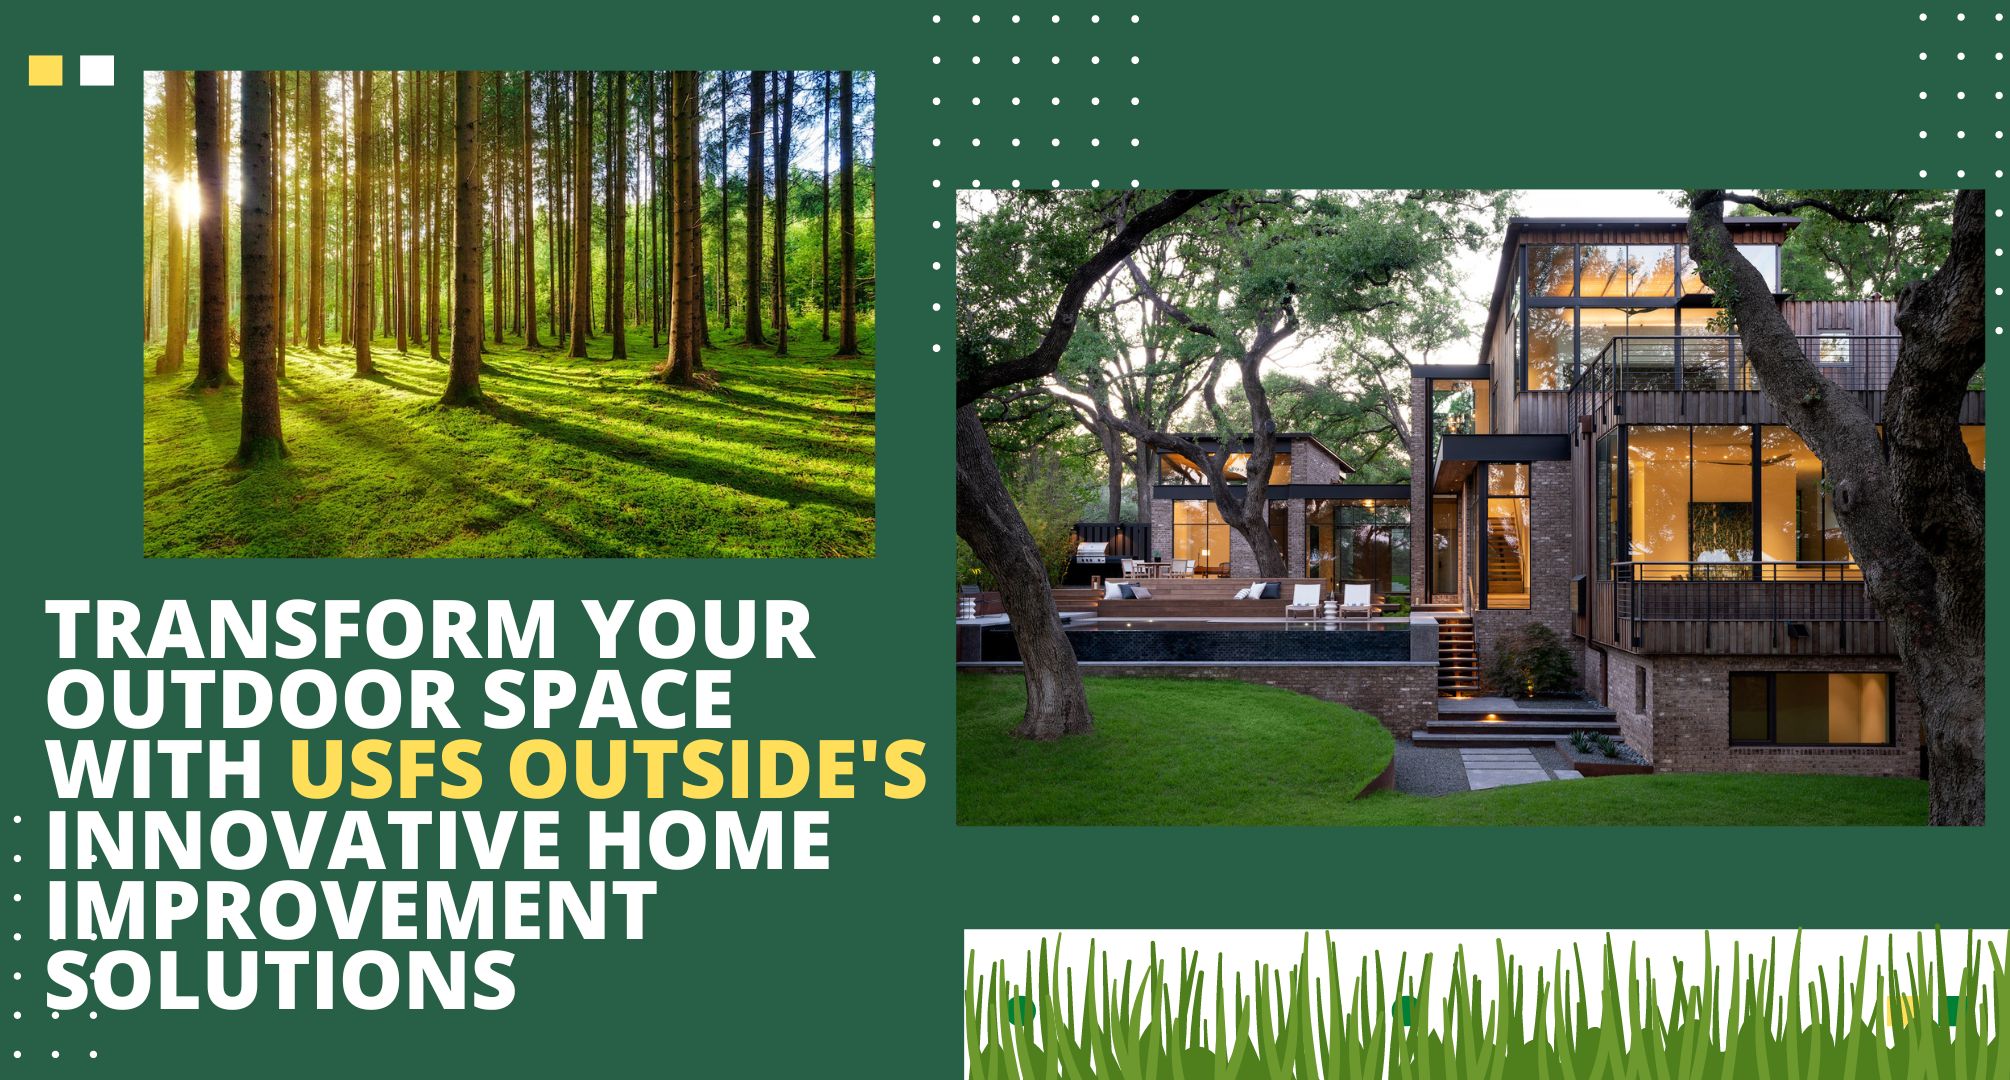 Transform Your Outdoor Space with USFS Outside's Innovative Home Improvement Solutions